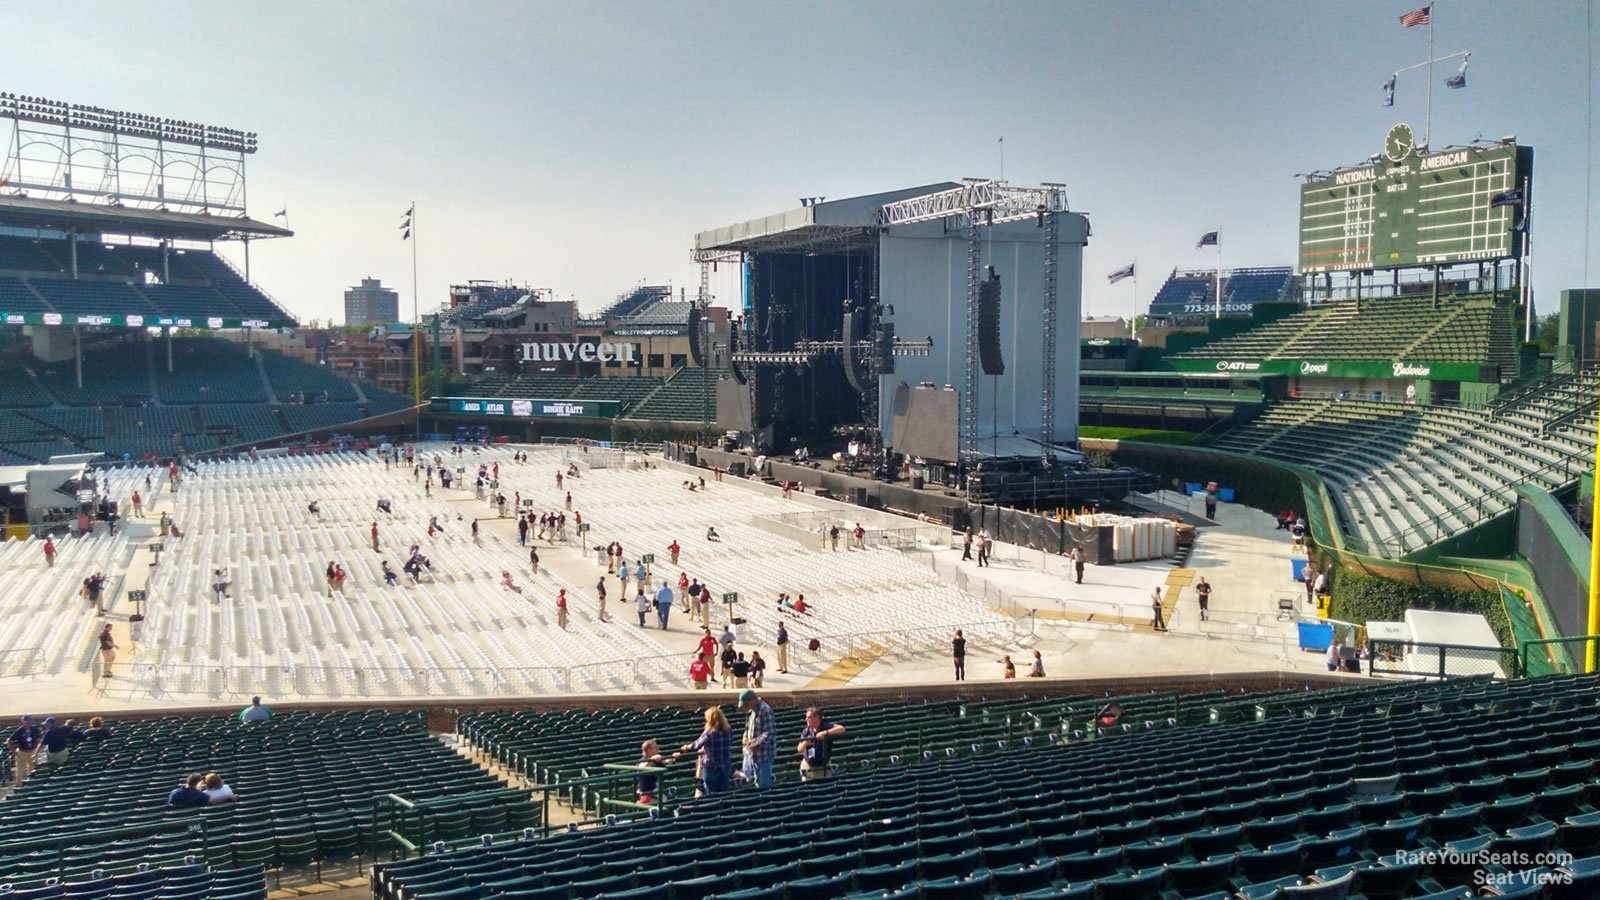 section 231, row 20 seat view  for concert - wrigley field